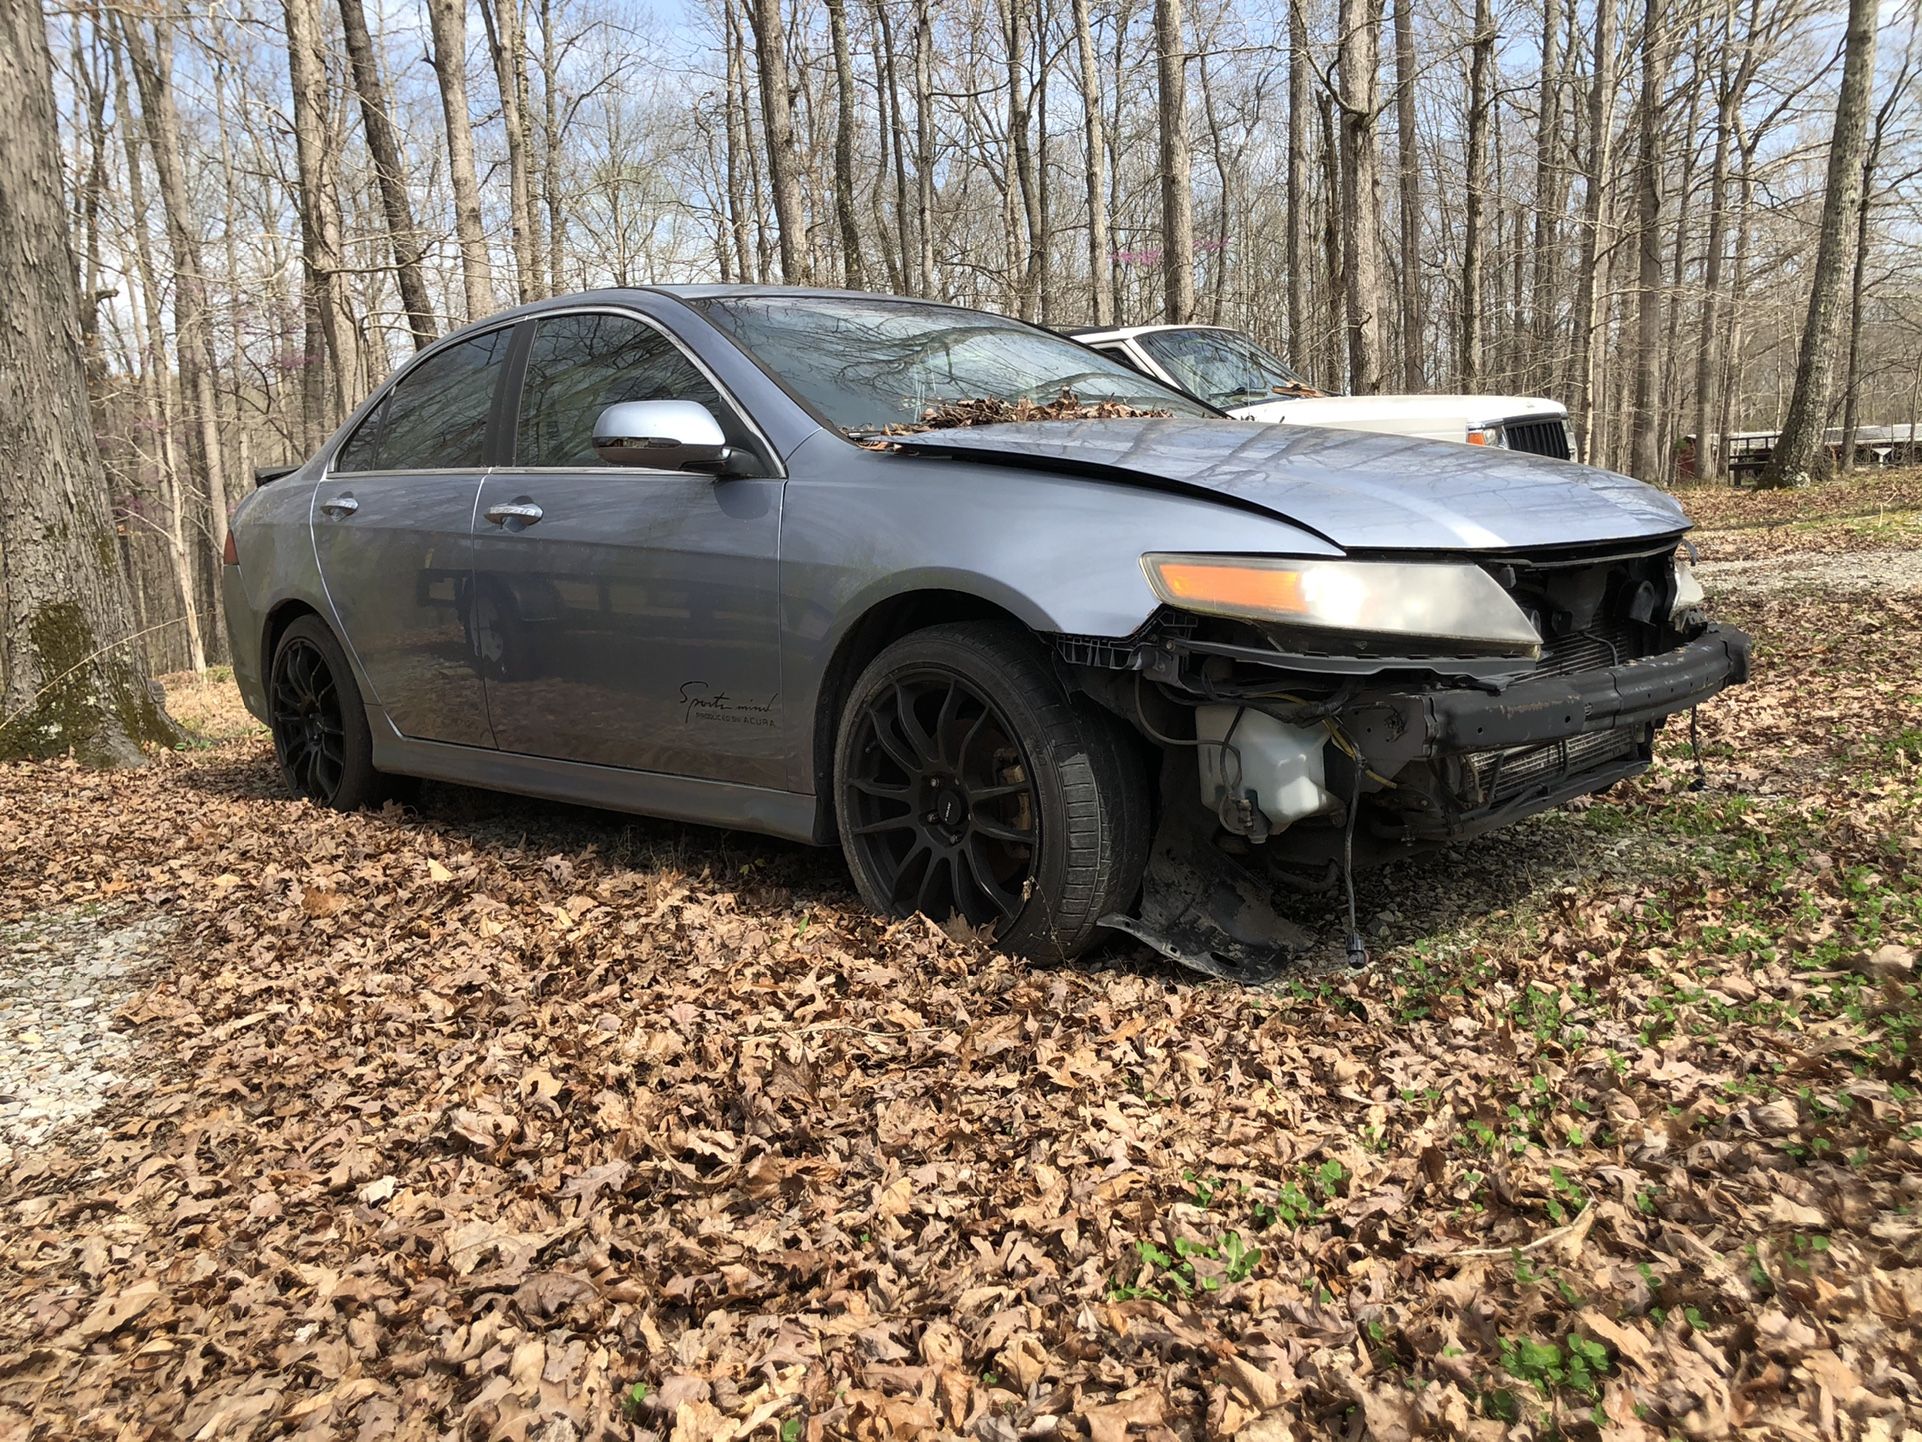 2006 Acura TSX - Part Out